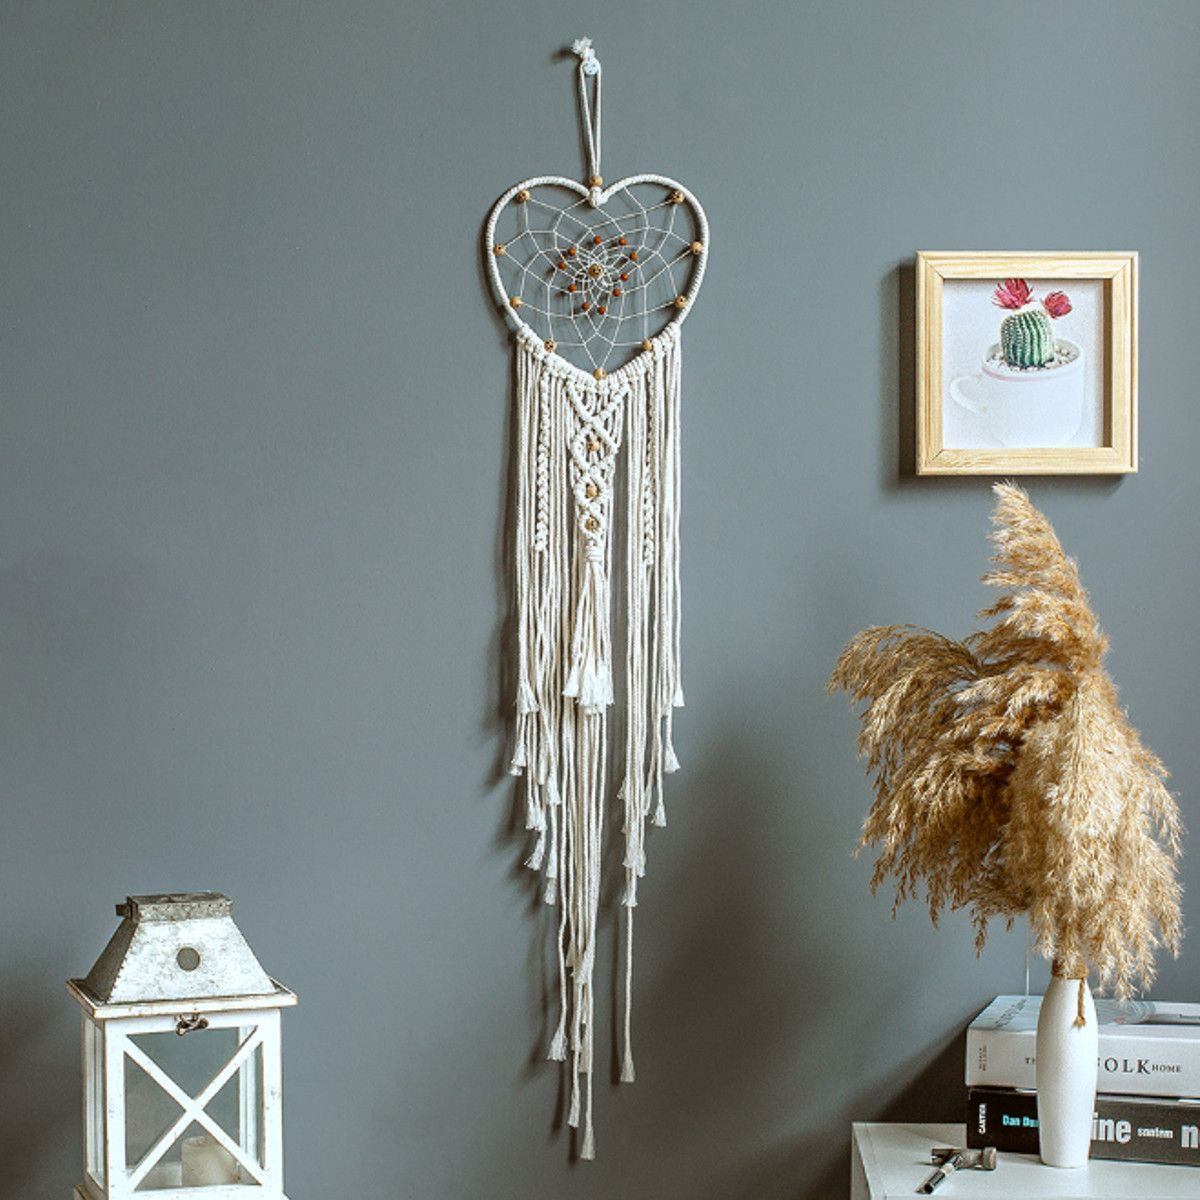 Bohemian-Tassel-Macrame-Woven-Wall-Hanging-Room-Decorate-Tapestry-Ornament-Home-1720851